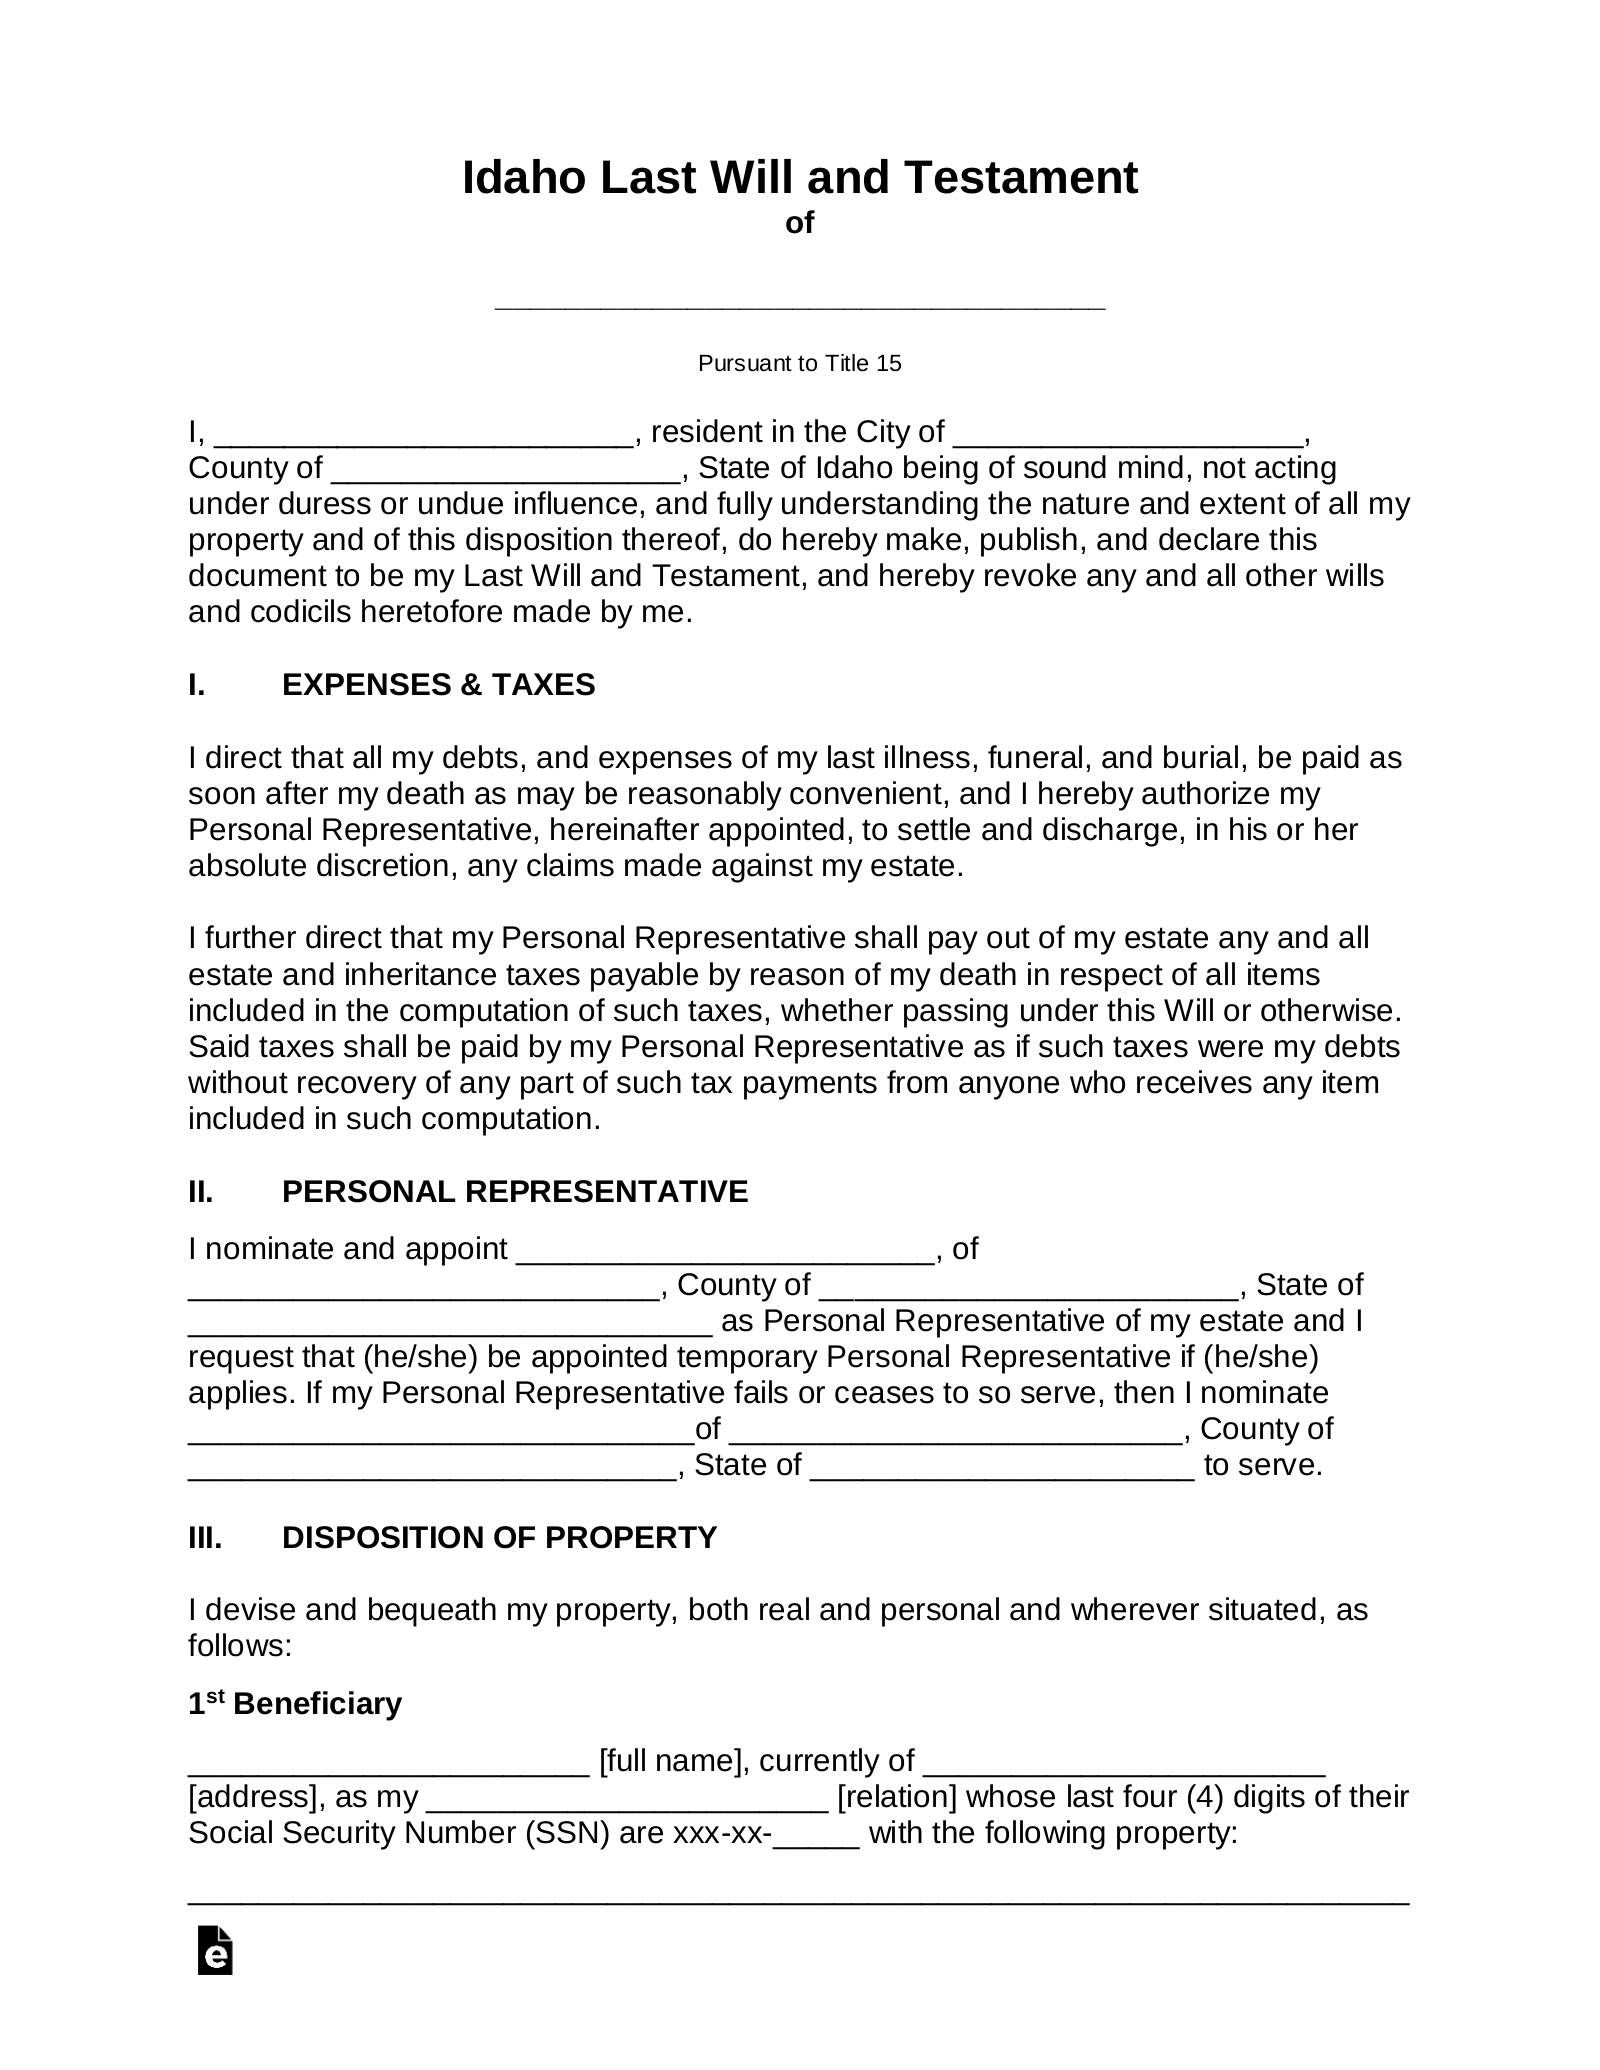 Idaho Last Will and Testament Template